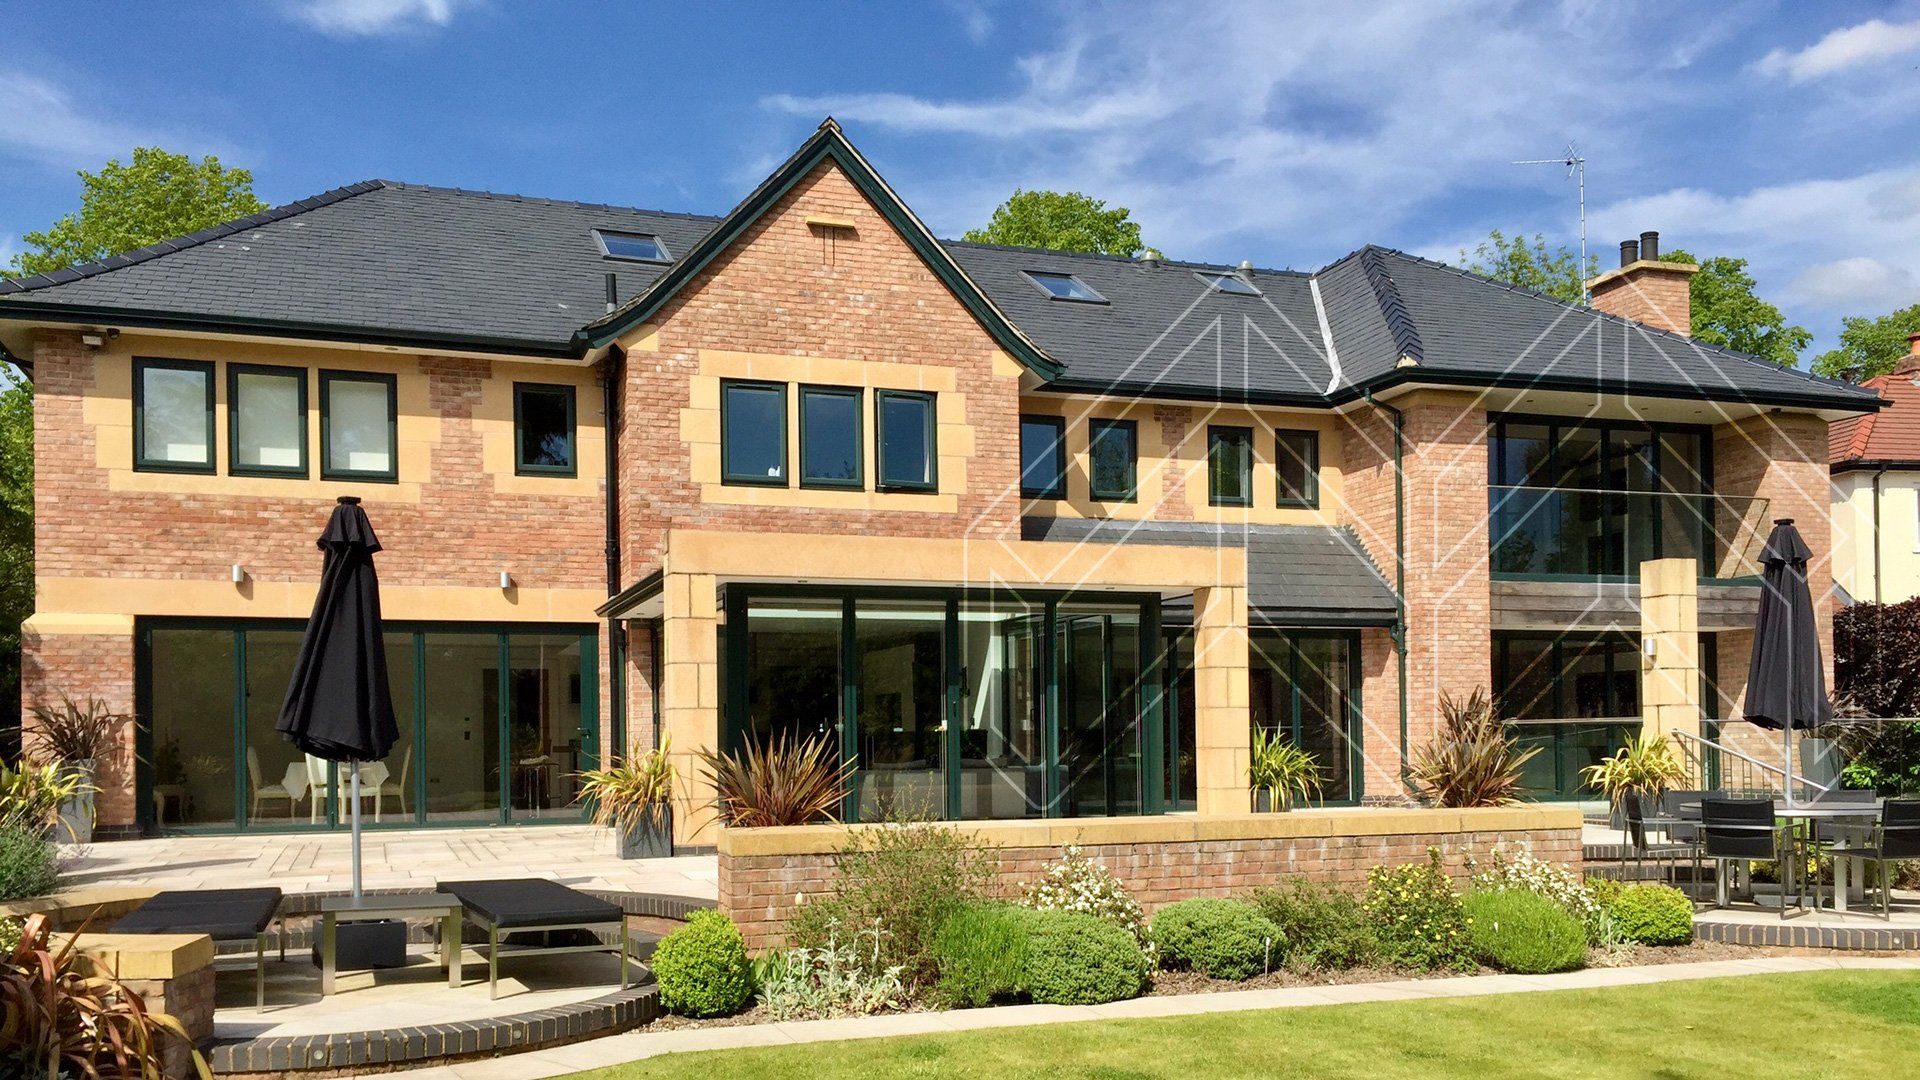 Find out more about new builds from Mark Davenport Builders